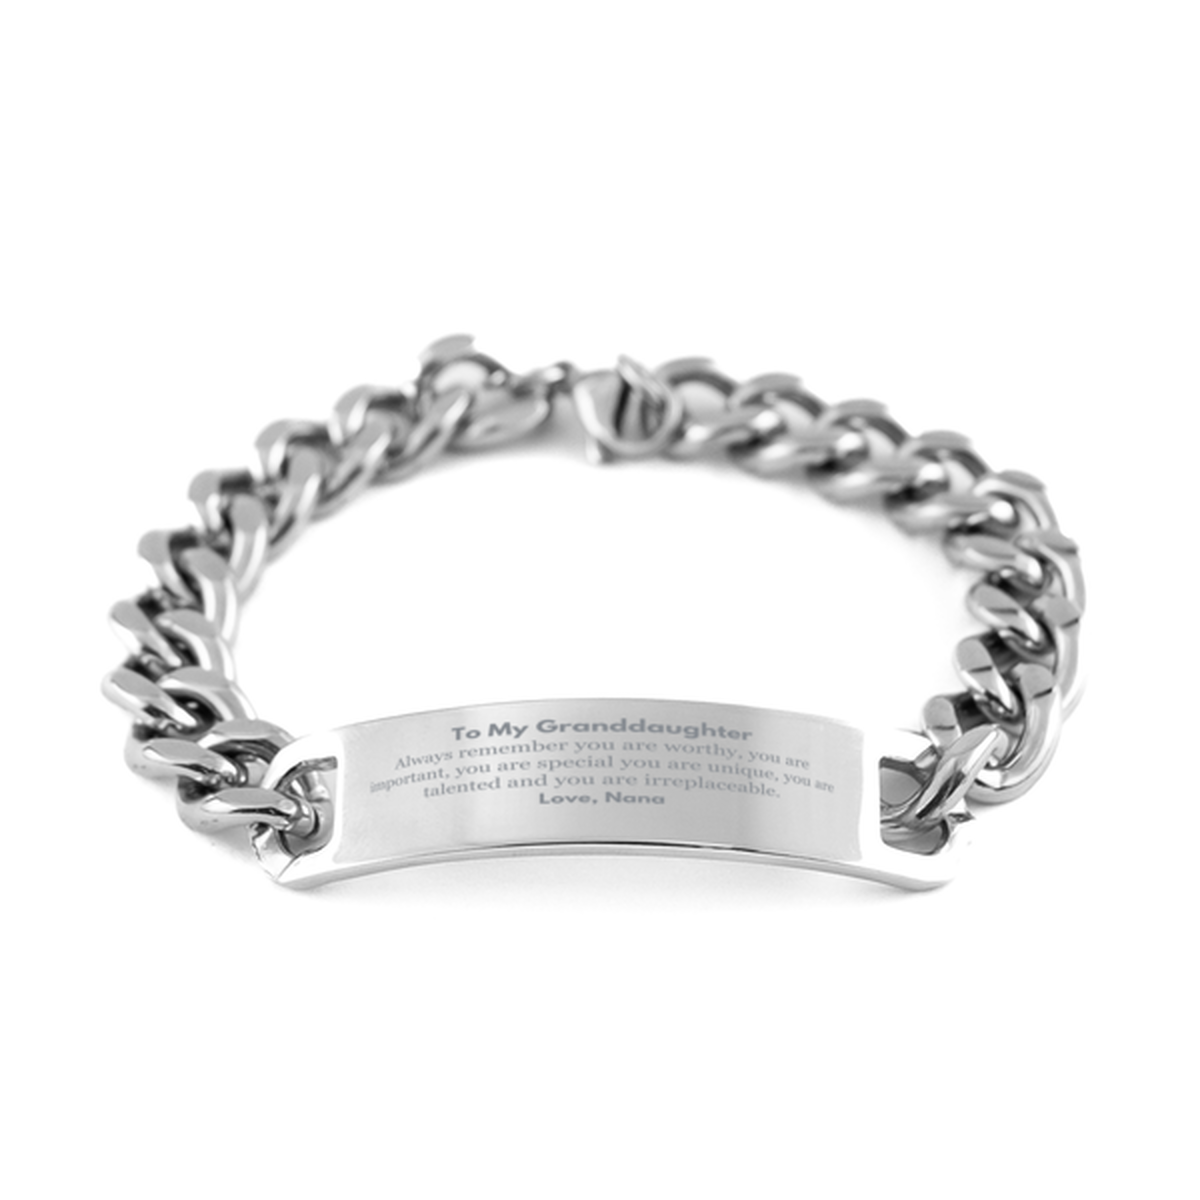 Granddaughter Birthday Gifts from Nana, Inspirational Cuban Chain Stainless Steel Bracelet for Granddaughter Christmas Graduation Gifts for Granddaughter Always remember you are worthy, you are important. Love, Nana